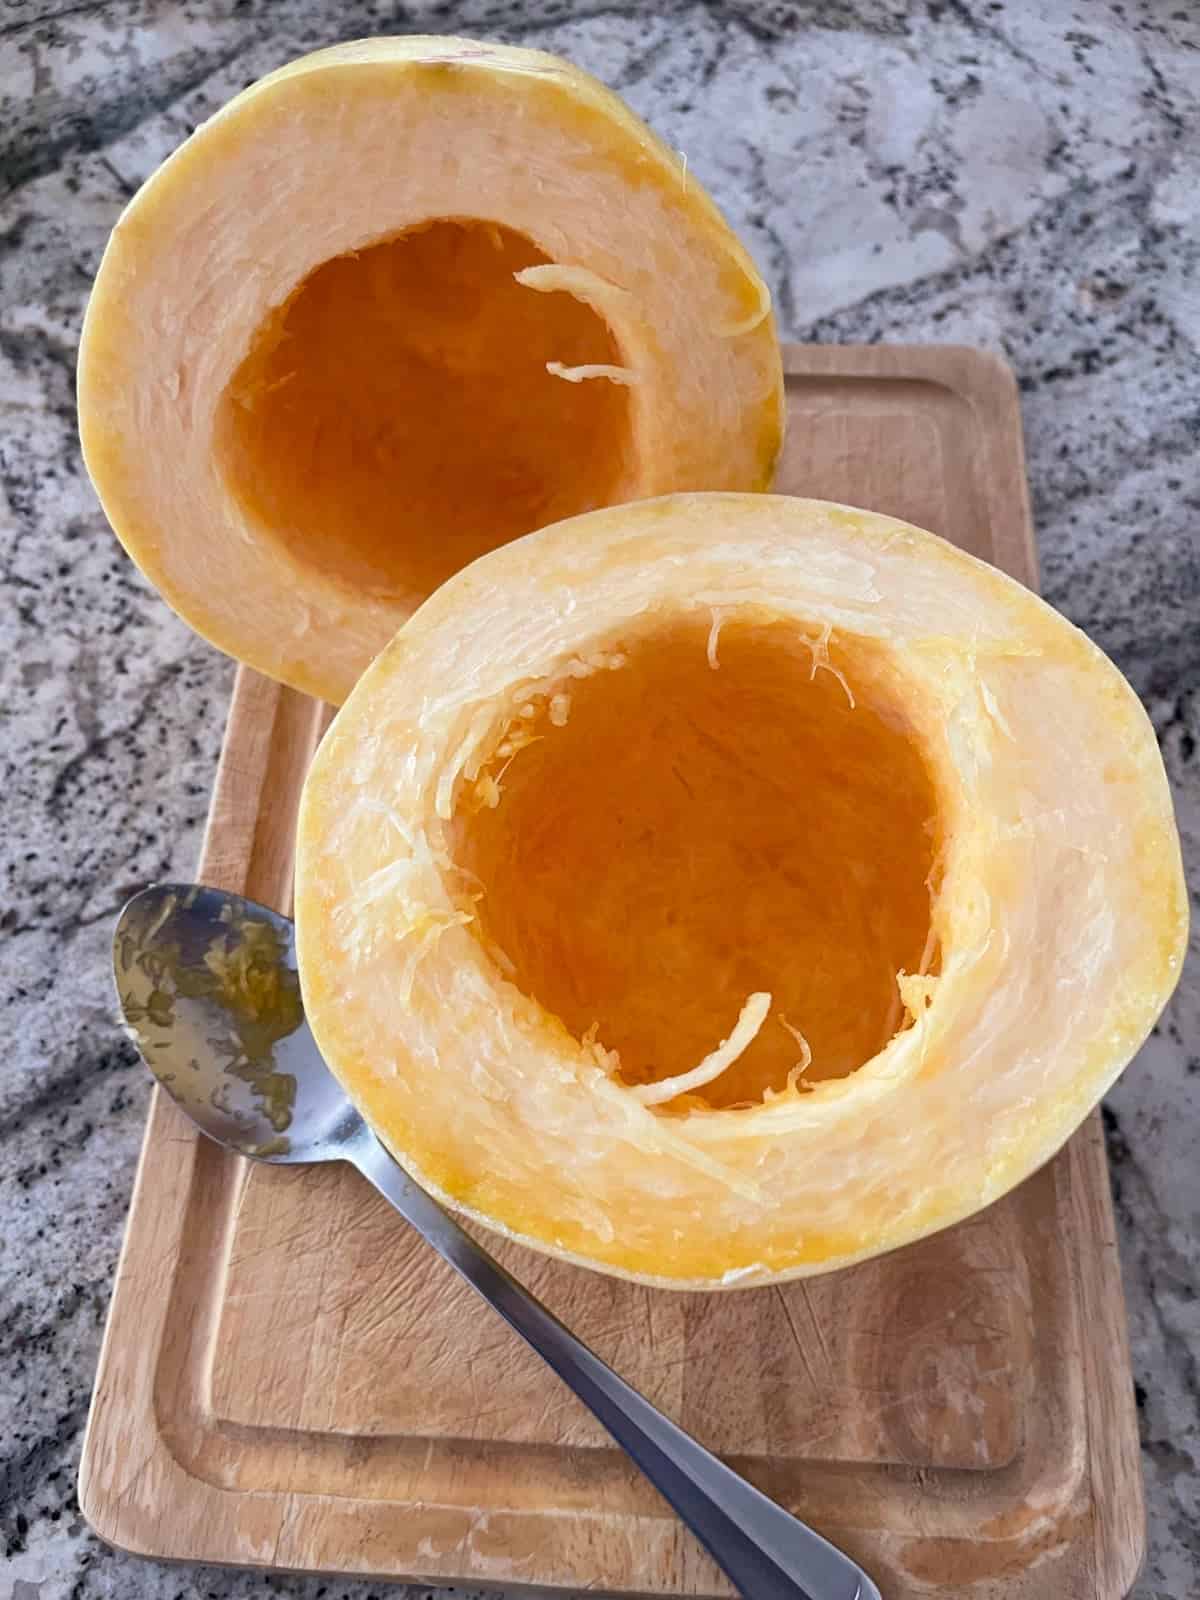 Spaghetti squash cut in half and cleaned of seeds on cutting board with spoon.